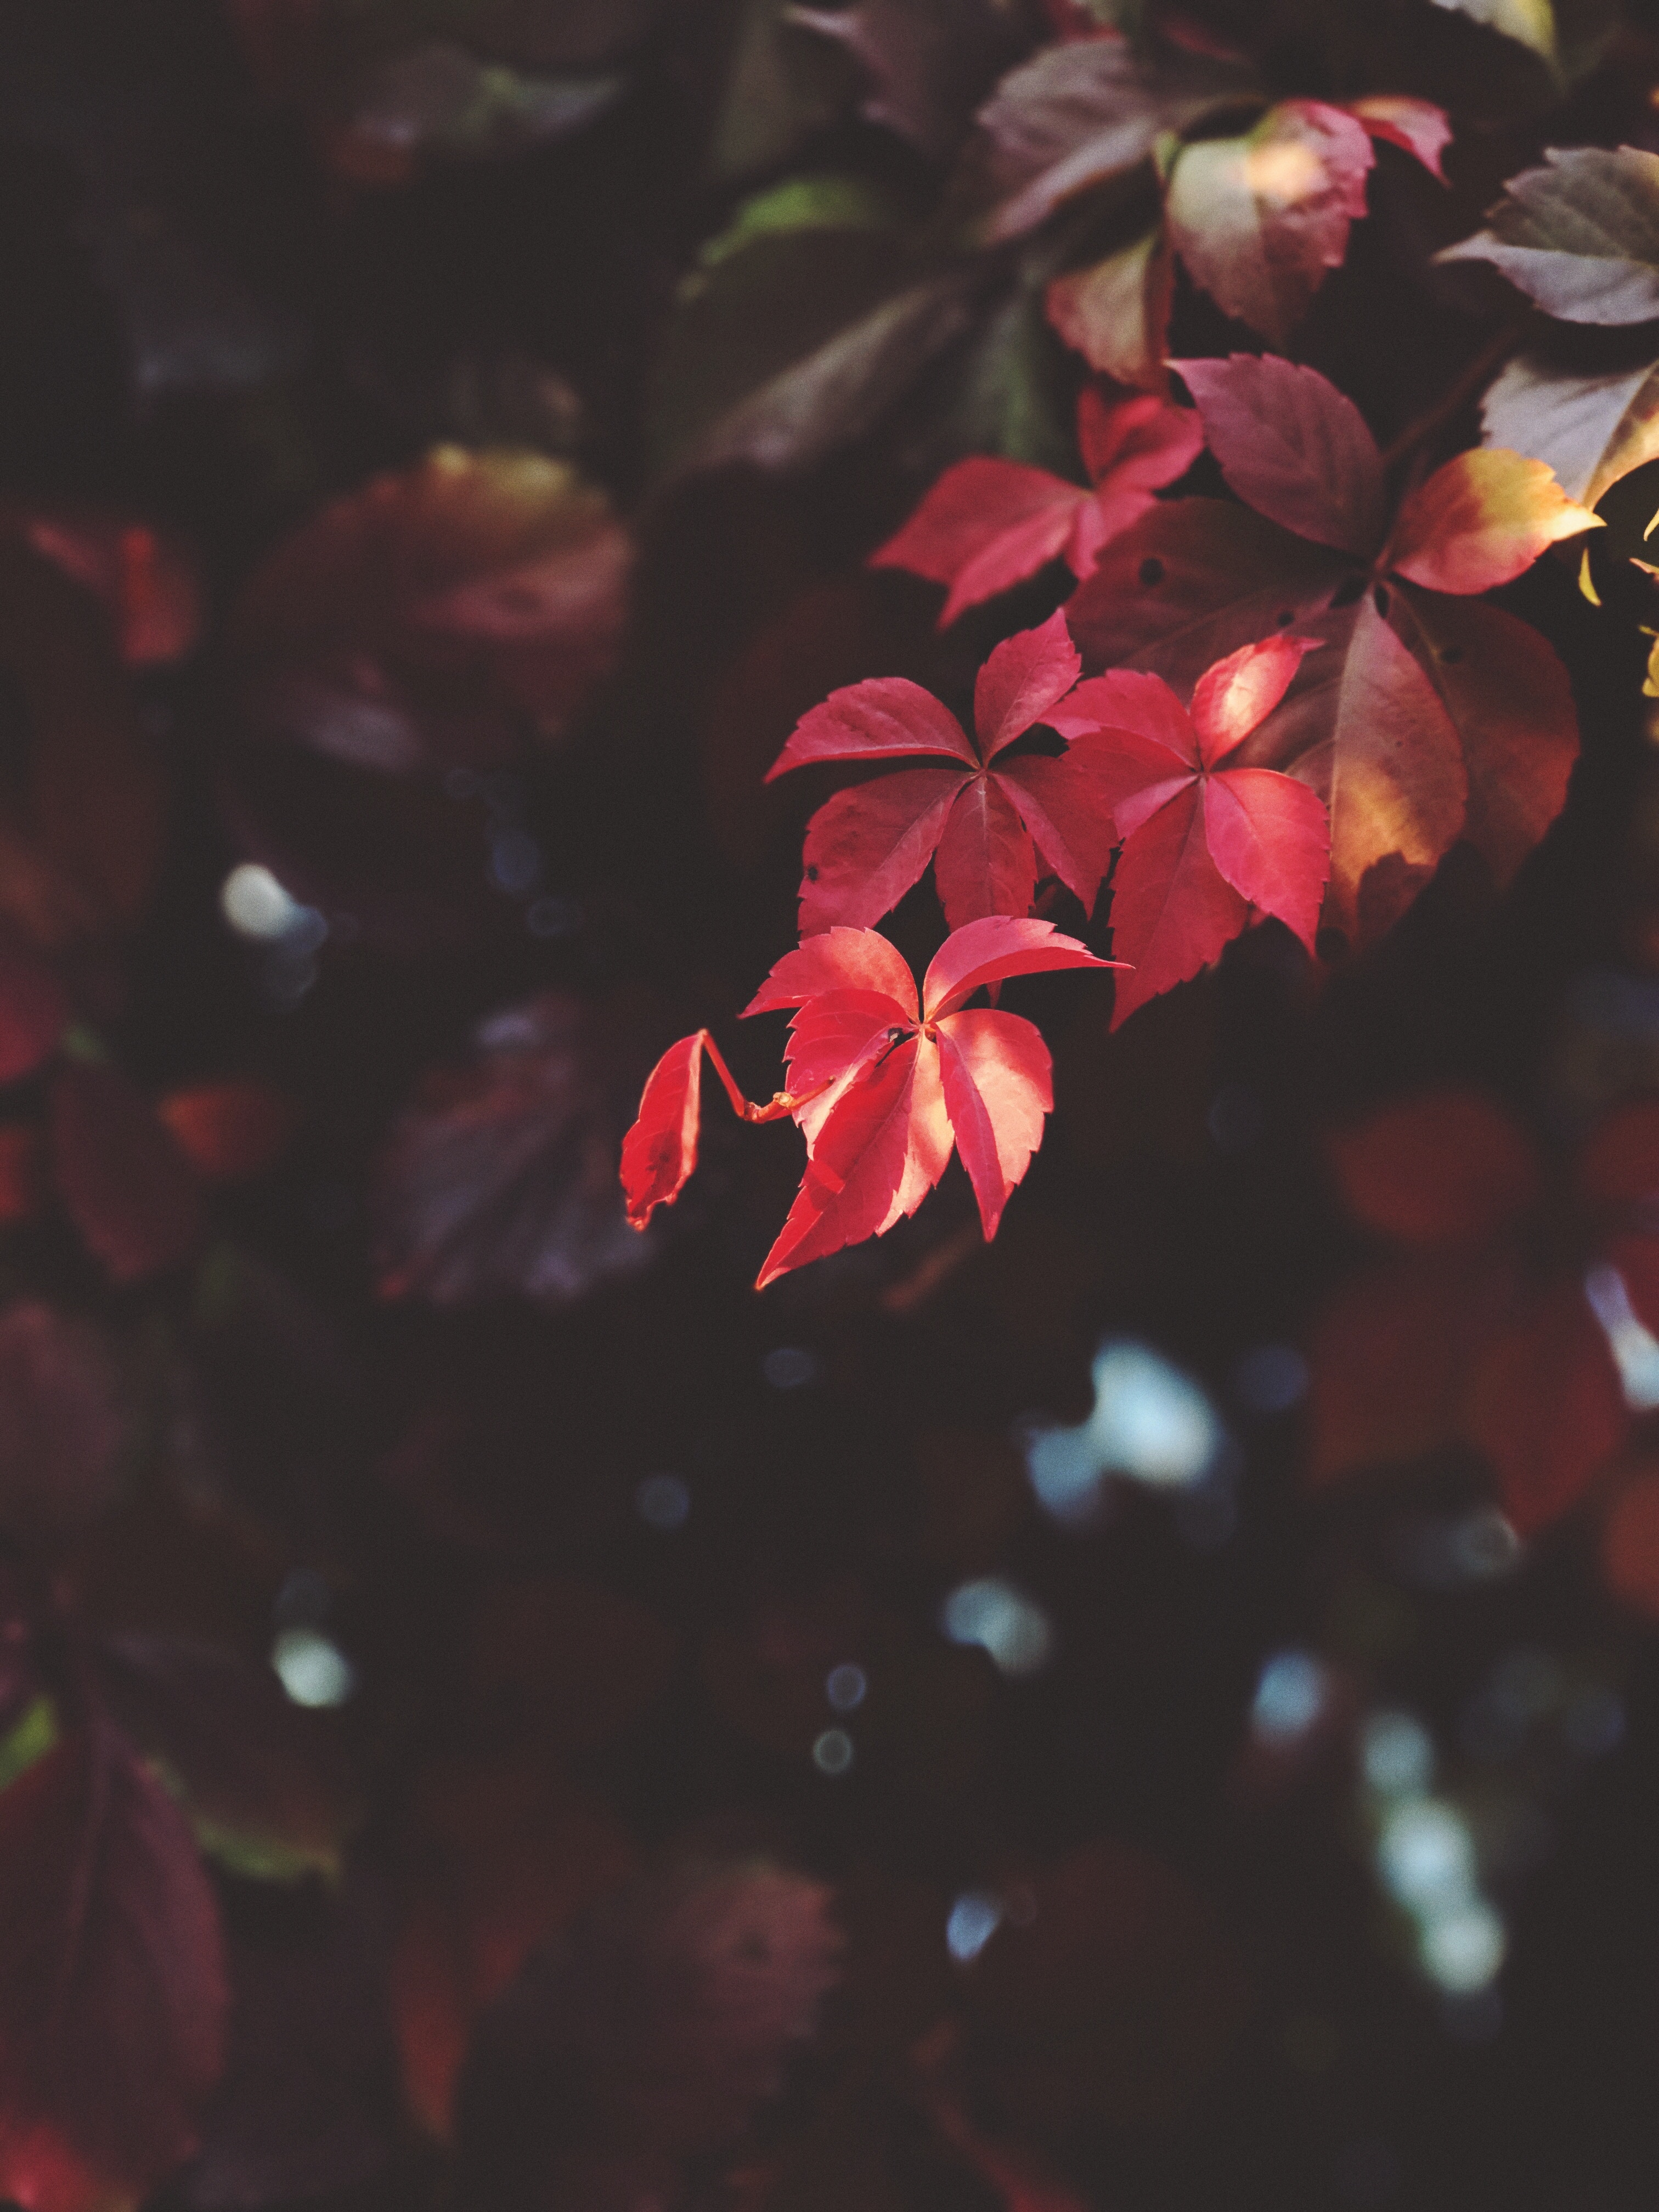 96807 download wallpaper leaves, plant, macro, blur, smooth, branch screensavers and pictures for free